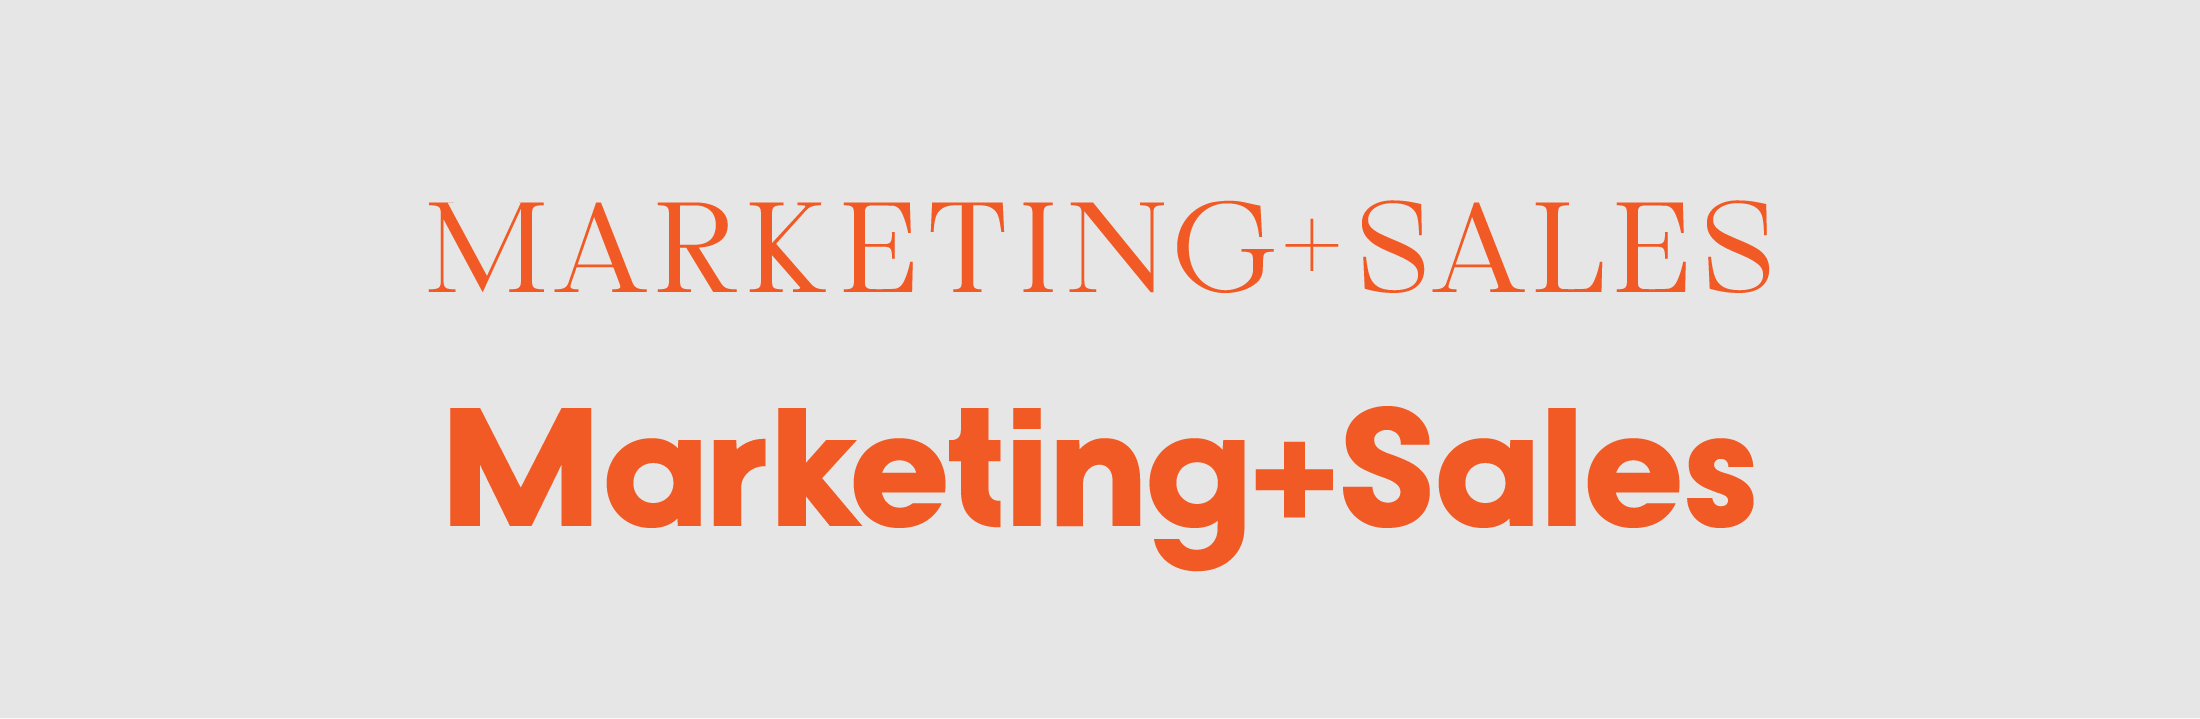 sans serif and serif fonts for marketing and sales logo designs